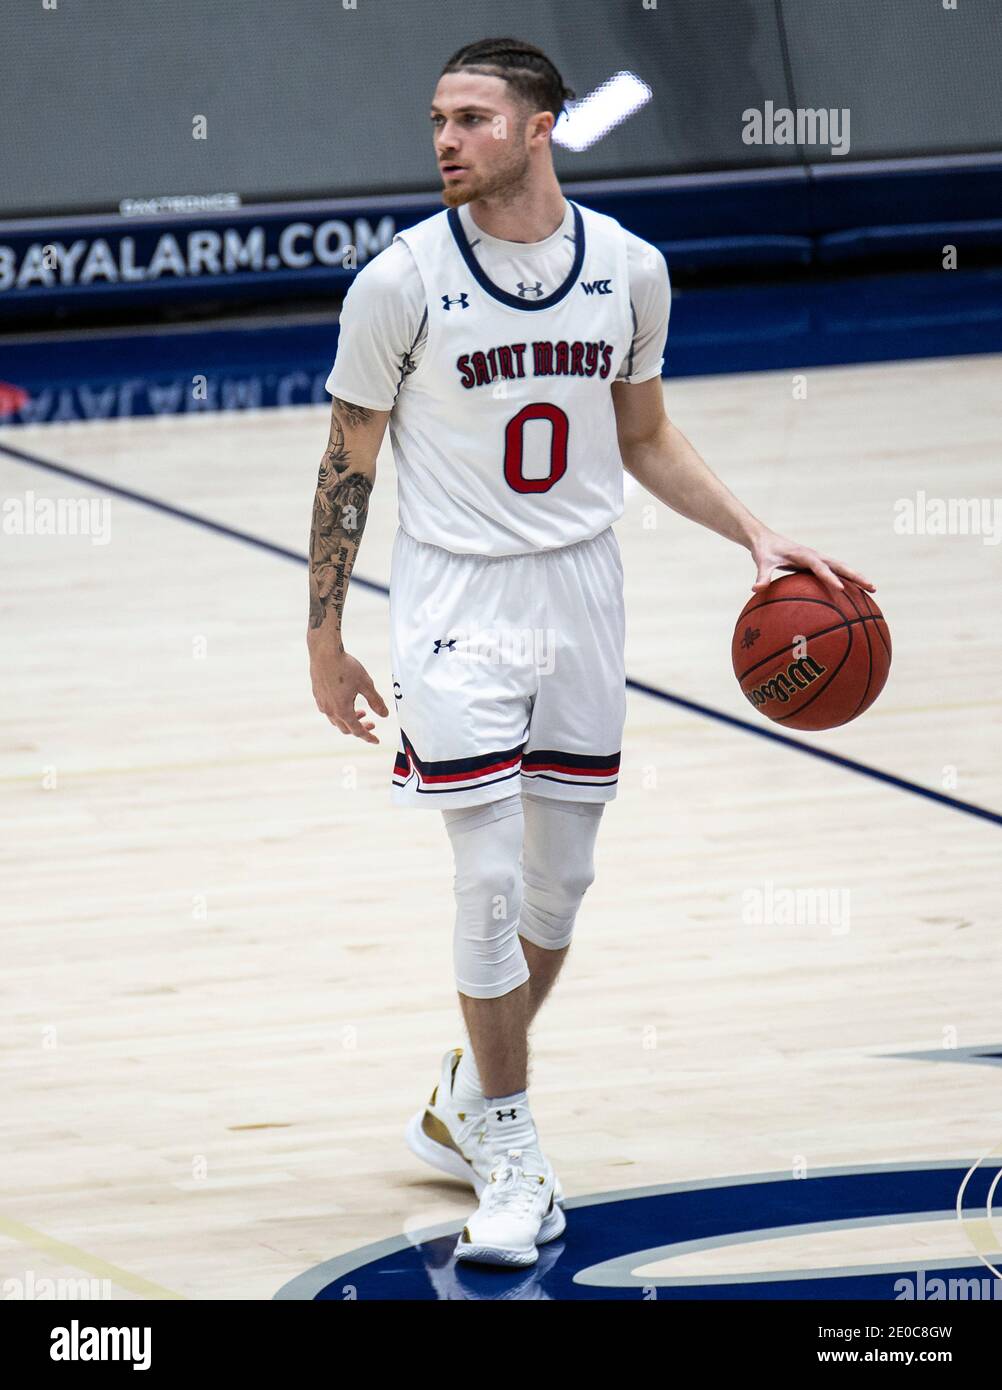 Moraga, CA U.S. 30th Dec, 2020. A. St. Mary's Gaels guard Logan Johnson (0) sets the play during the NCAA Men's Basketball game between Sacramento State Hornets and the Saint Mary's Gaels 63-45 win at McKeon Pavilion Moraga Calif. Thurman James/CSM/Alamy Live News Stock Photo